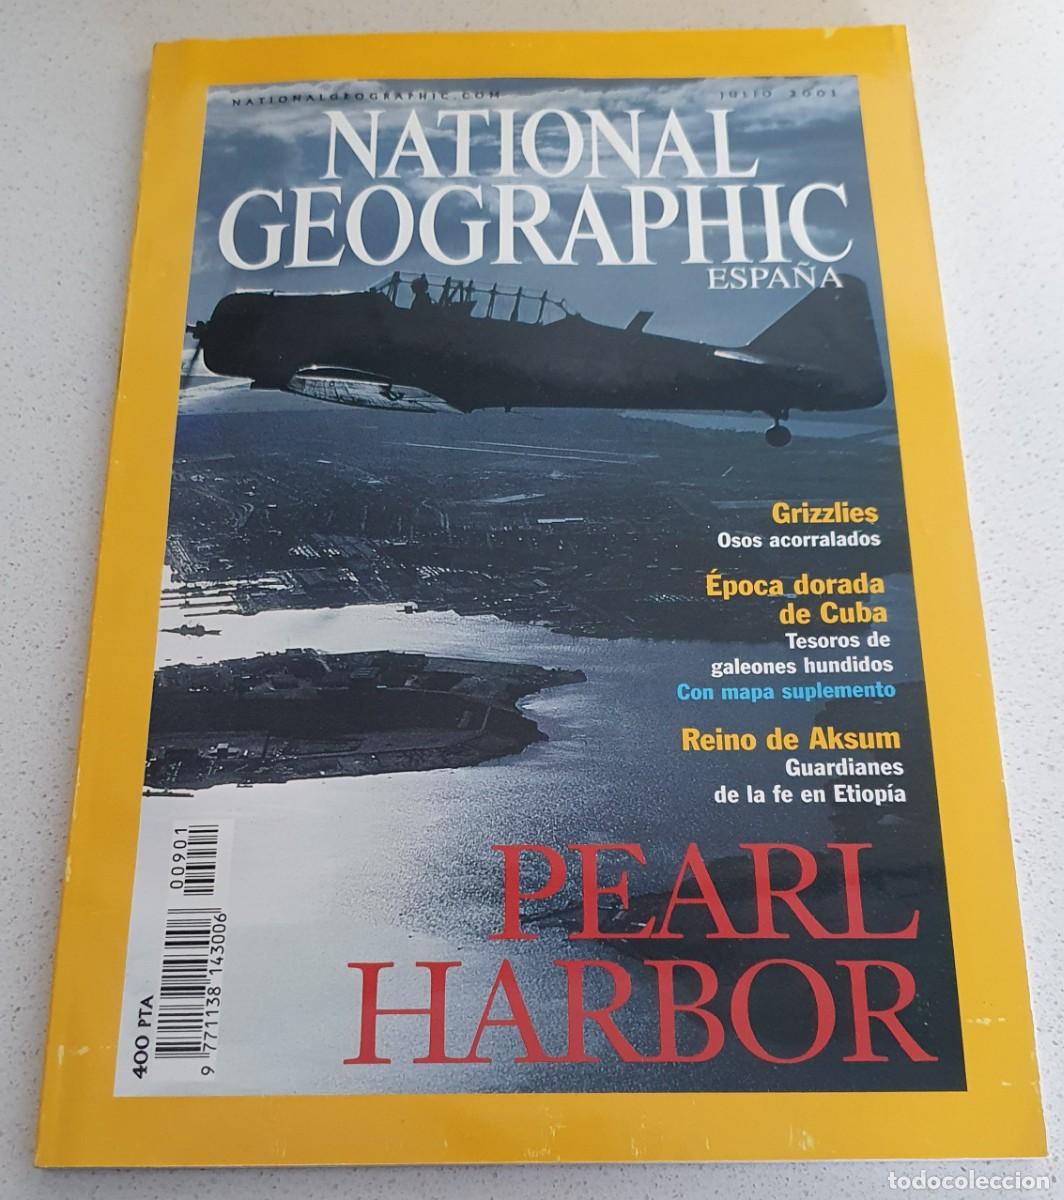 revista national geographic julio 2001. pearl h - Buy Magazine: National  Geographic on todocoleccion